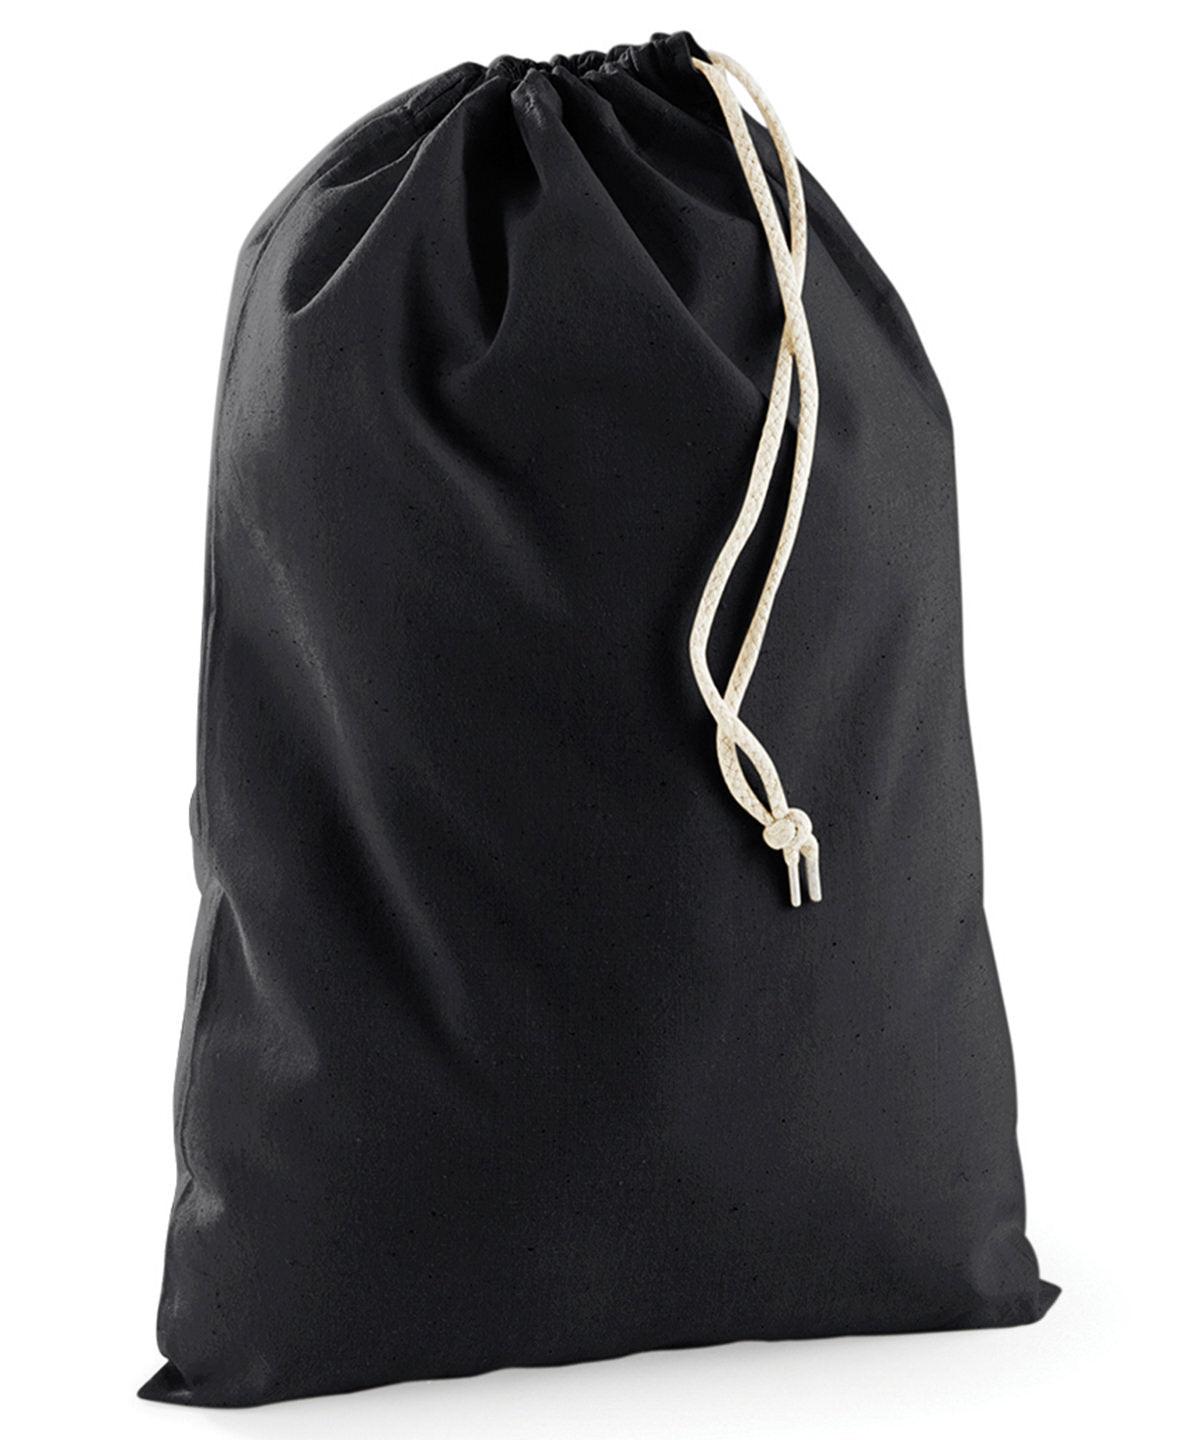 Black - Cotton stuff bag Bags Westford Mill Bags & Luggage, New Colours for 2021 Schoolwear Centres